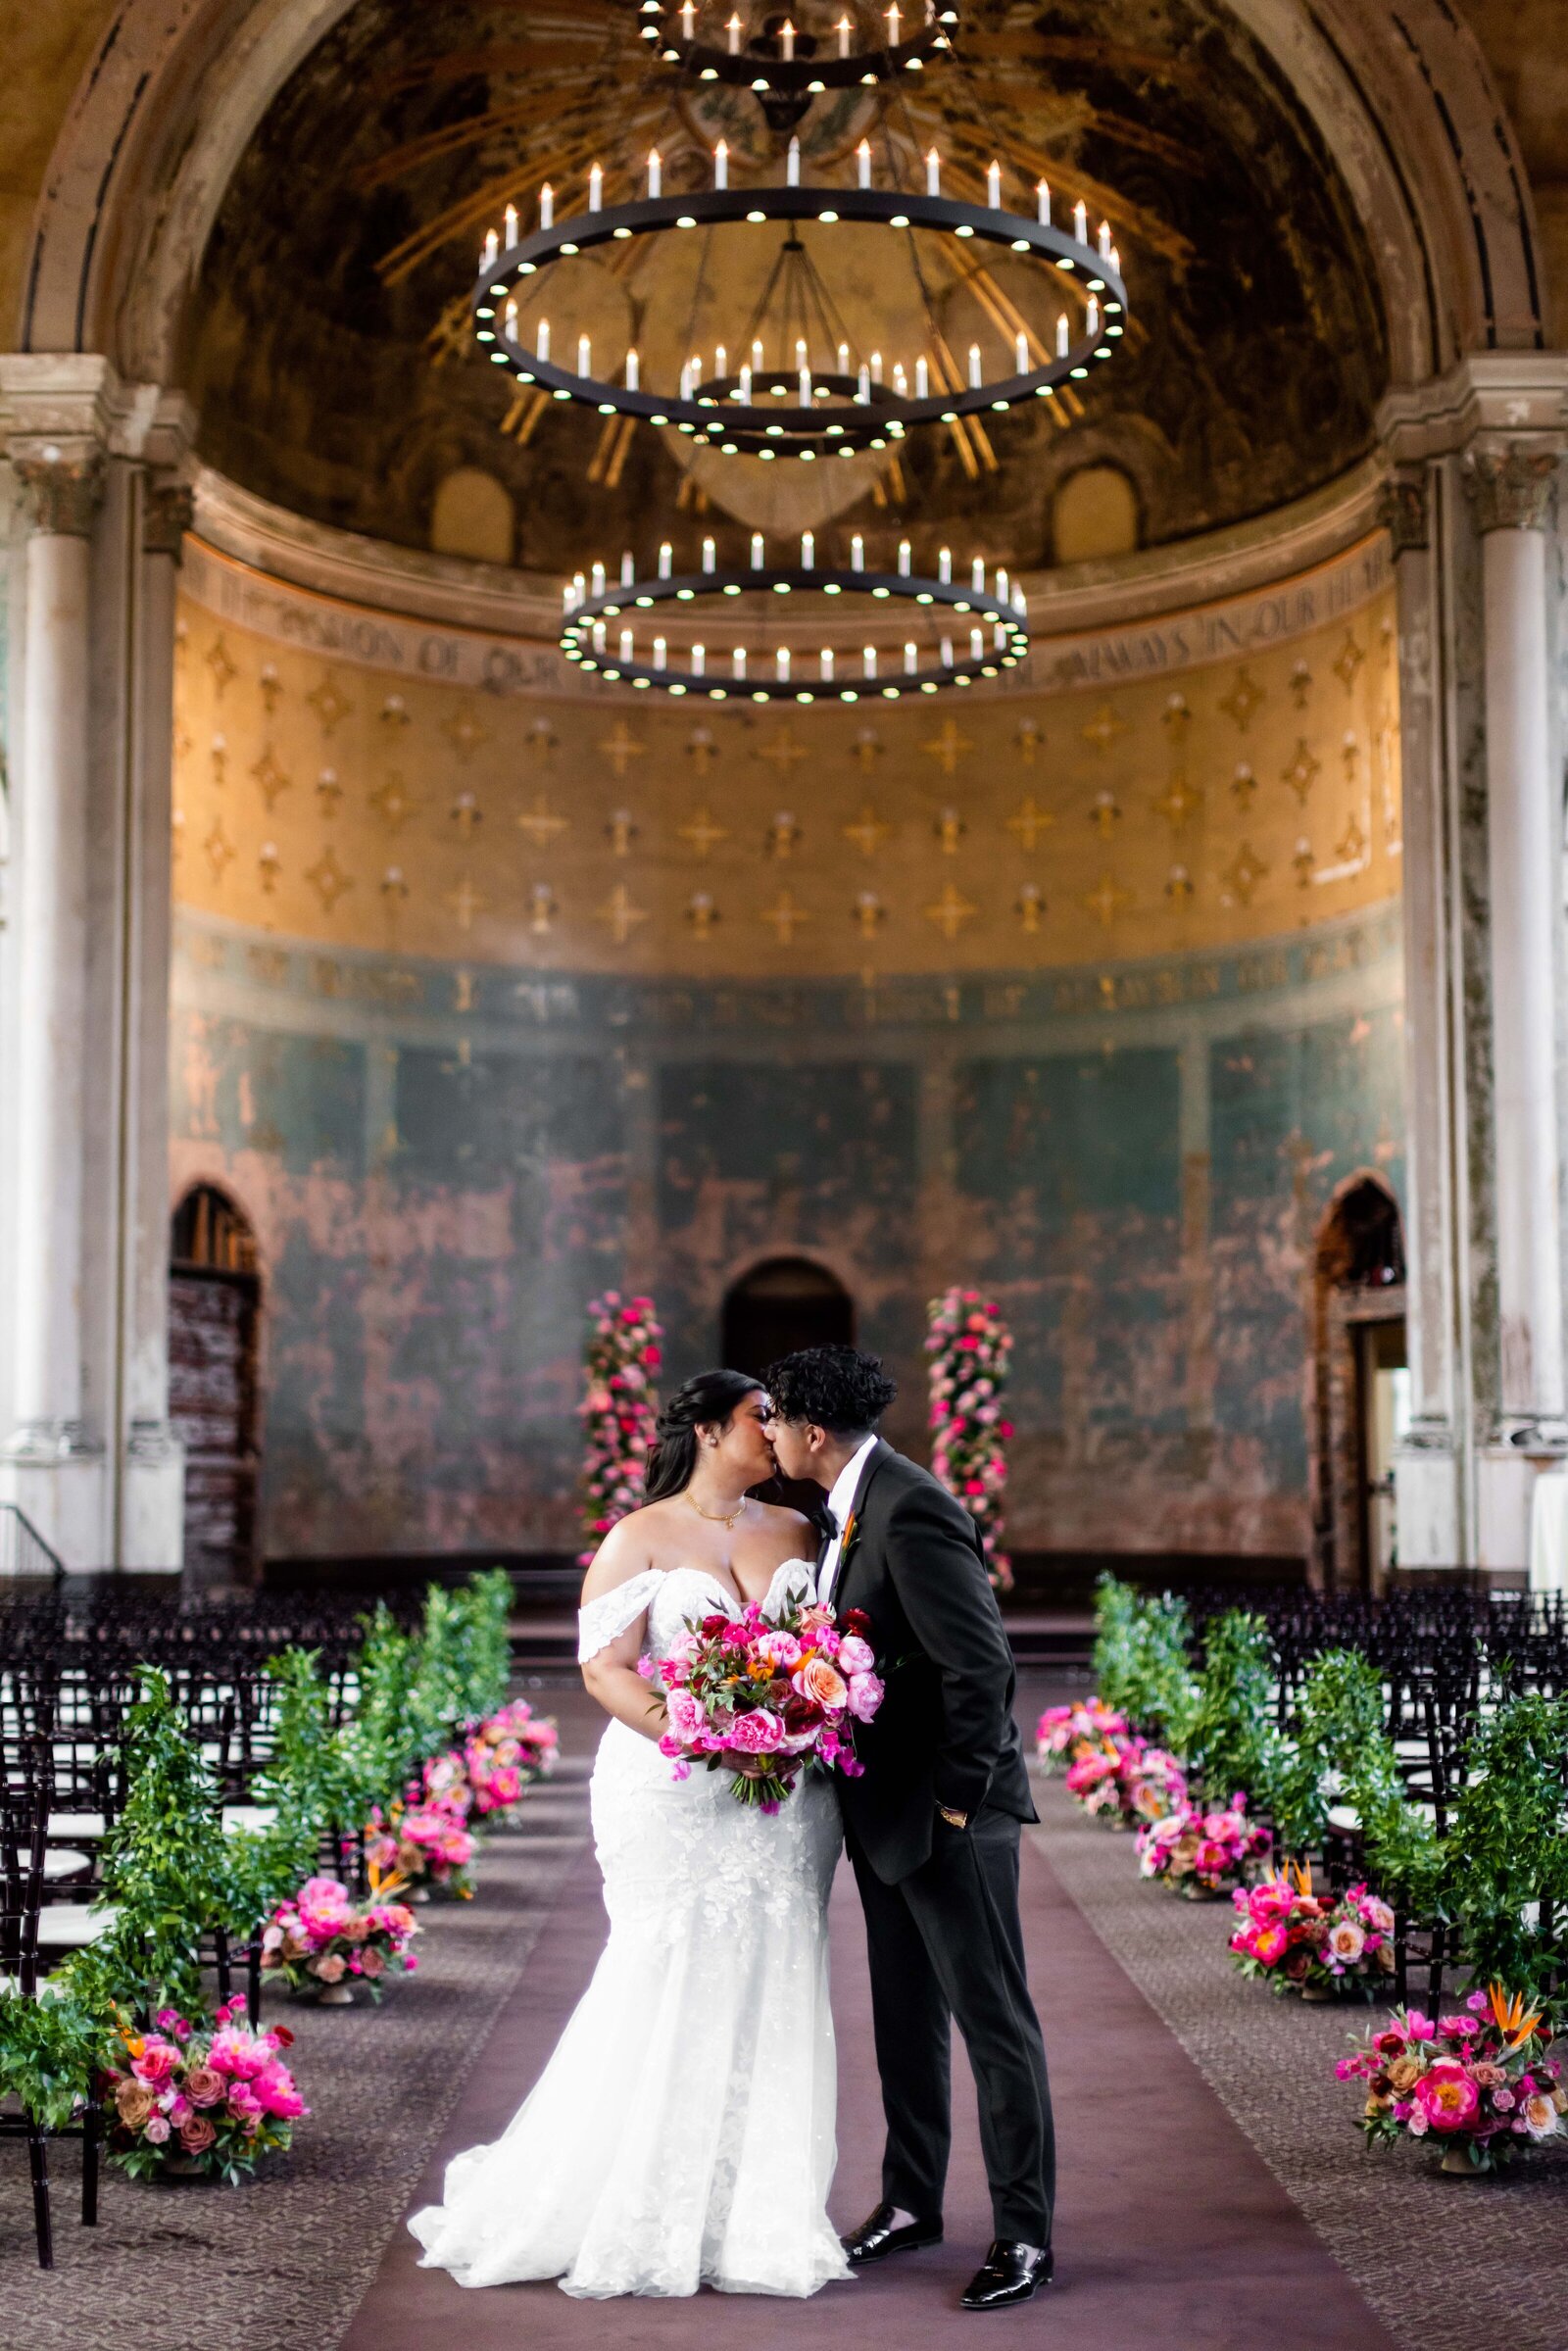 This enchanting photograph features Mary Grace and Martin standing hand-in-hand, enveloped in a dreamy aisle of vibrant pink florals during their wedding ceremony. The aisle is lavishly decorated with various shades of pink flowers, creating a romantic and lush pathway that leads to the couple. The stunning visual composition captures the essence of their love and the joy of the moment, enhanced by the floral splendor that surrounds them. This image is a testament to the couple's vibrant personality and their celebration's exquisite attention to detail, making it a captivating highlight of their wedding day. Ideal for couples seeking inspiration for creating a visually impactful floral arrangement on their special day.